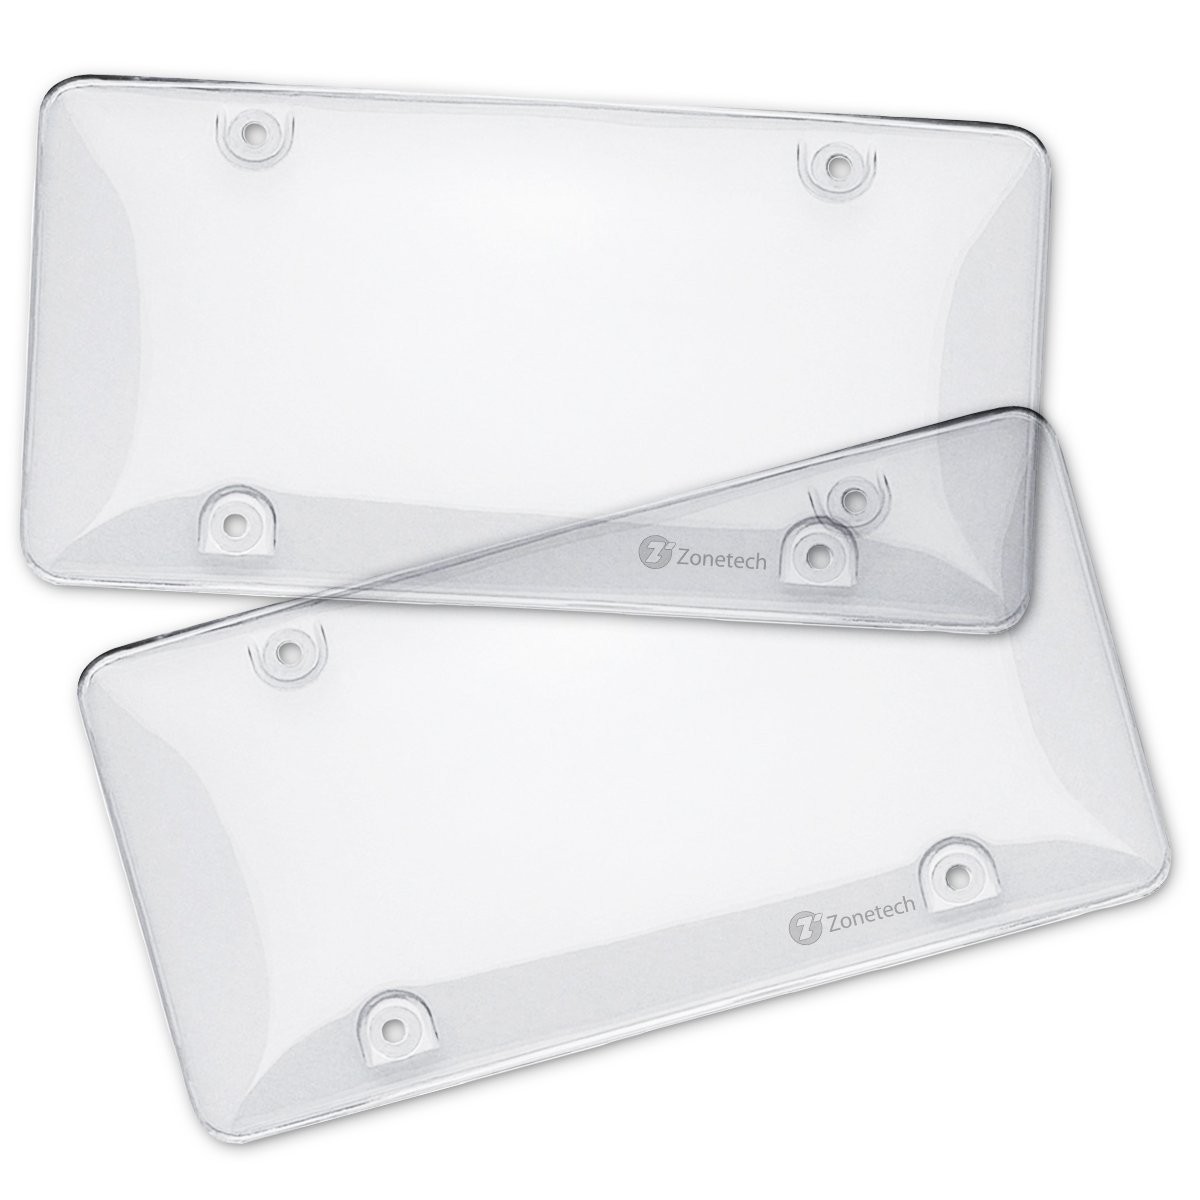 Zone Tech Clear License Plate Shields - 2-Pack Novelty/License Plate Clear Bubble Shields